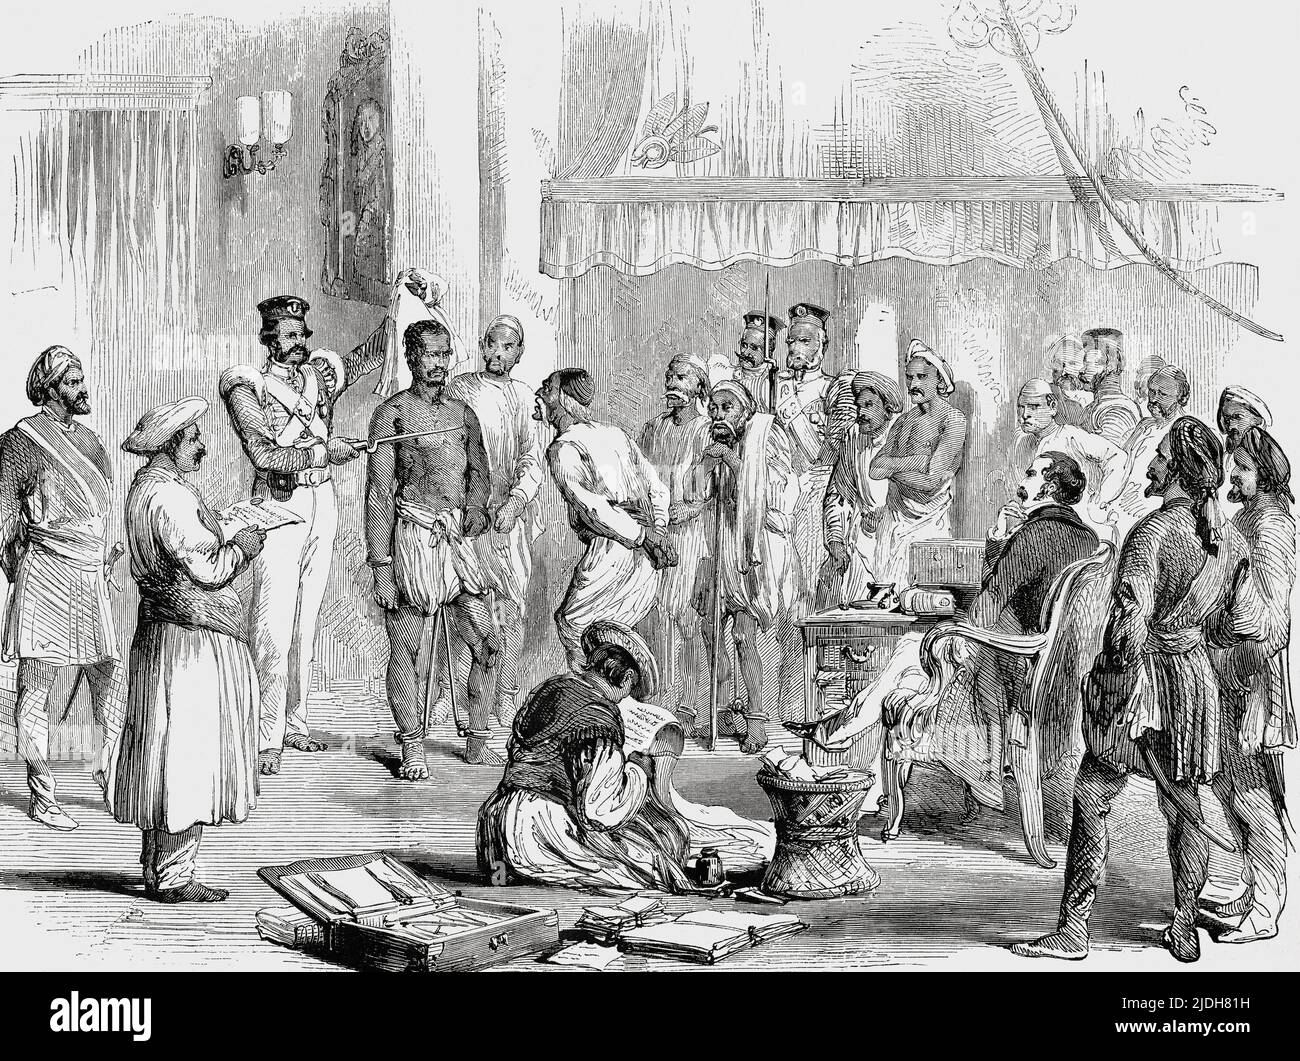 Magistrate's Cutchery(court) in Awadh or Oudh 1853. An Indian prisoner in irons accused of poisoning is brought before an English magistrate.  From L'Univers Illustre, published Paris, 1859 Stock Photo